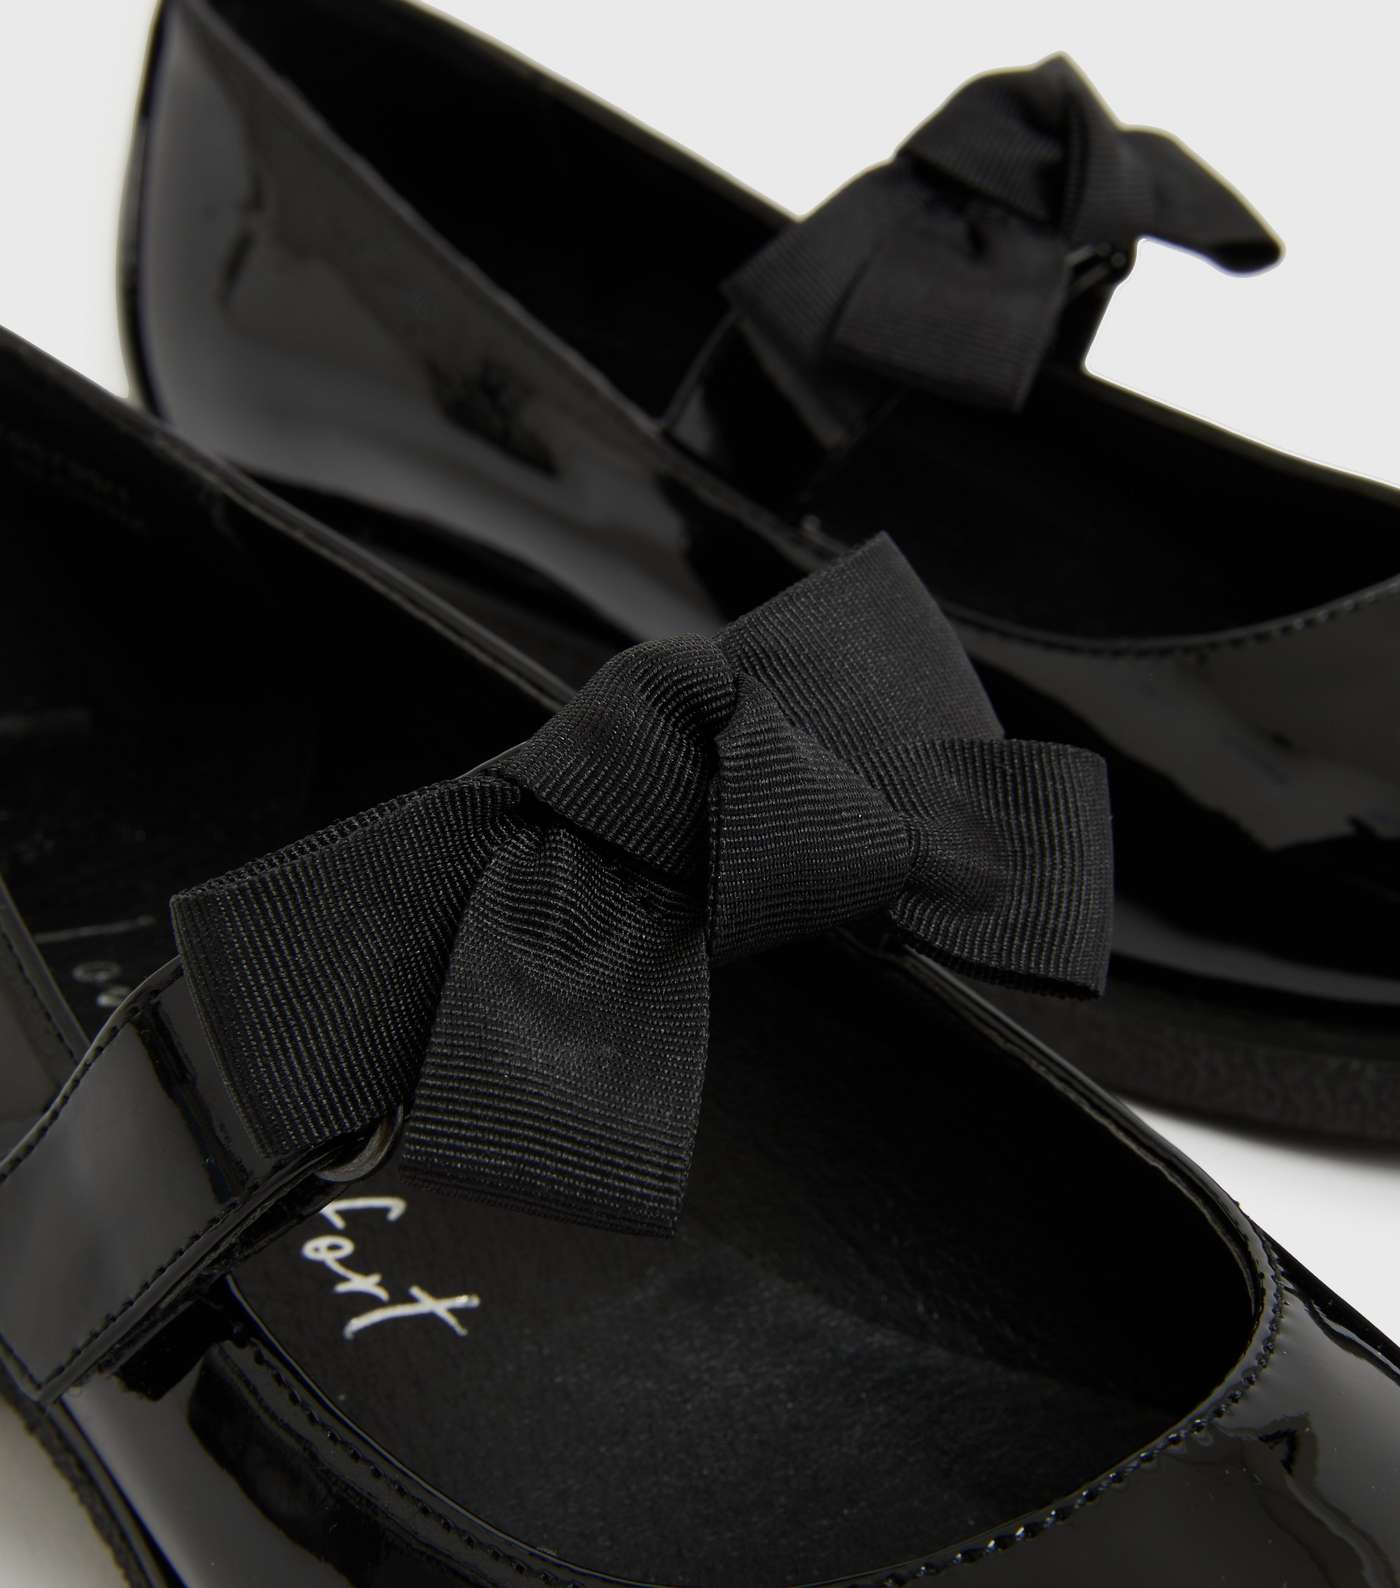 Girls Black Patent Bow Strap Mary Jane Shoes Image 4